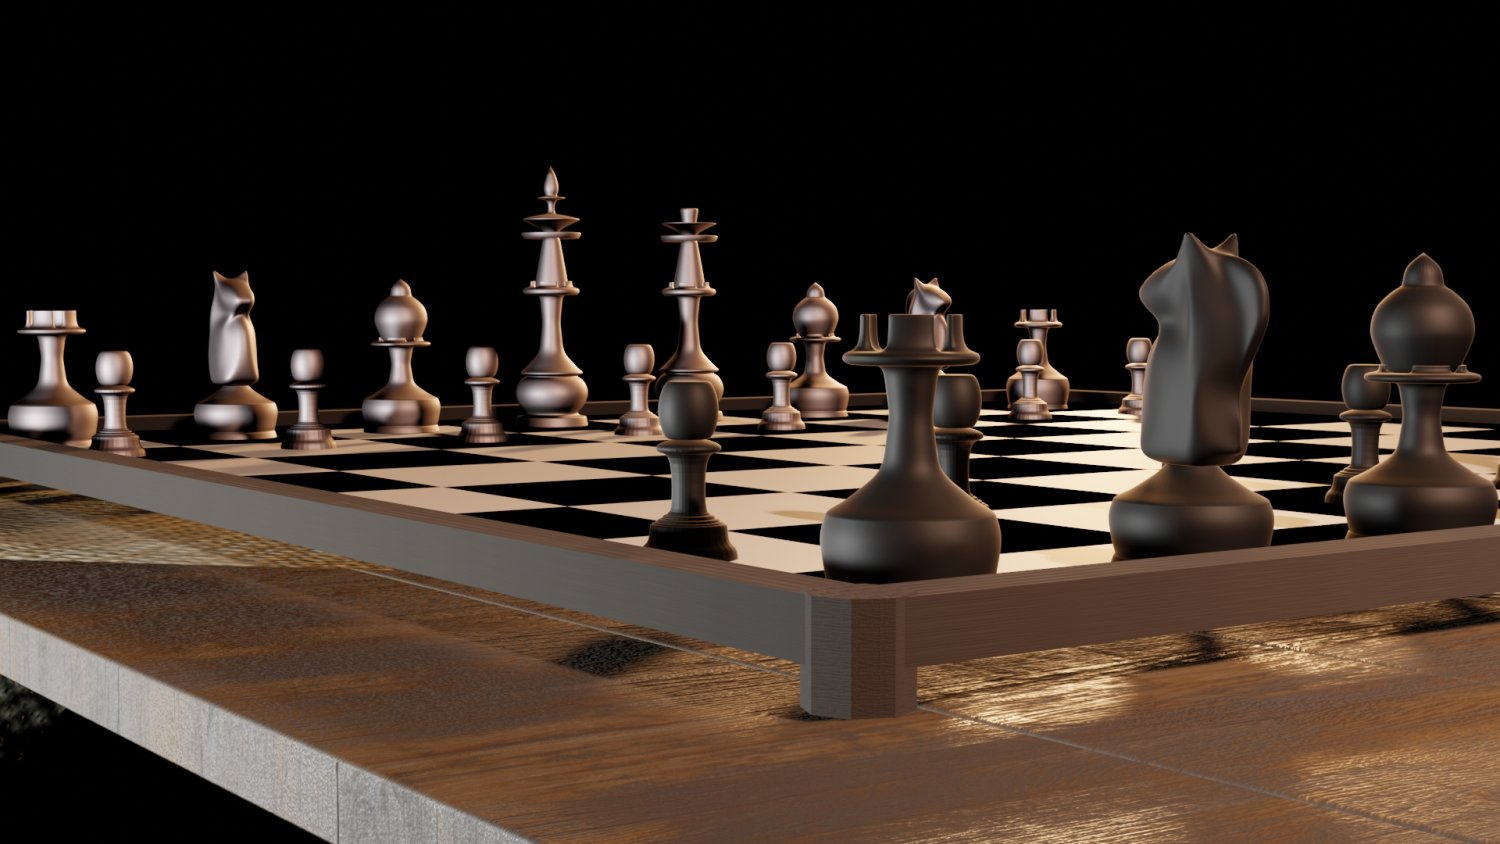 Dark room with a 3d chess board